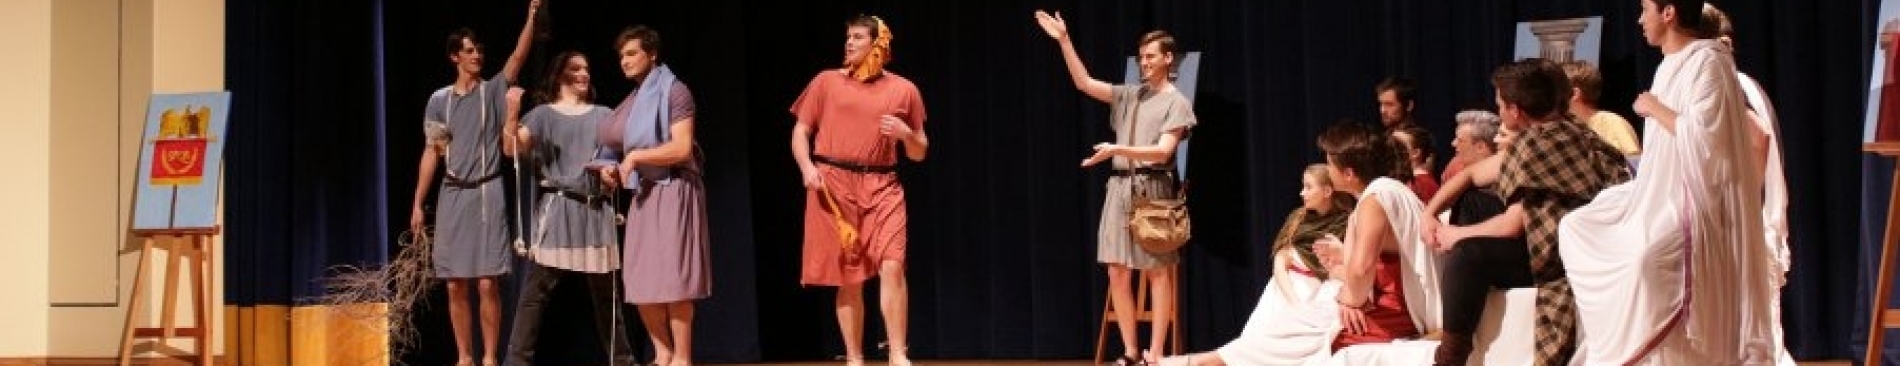 Slideshow: Students Perform Shakespeare’s A Midsummer Nights